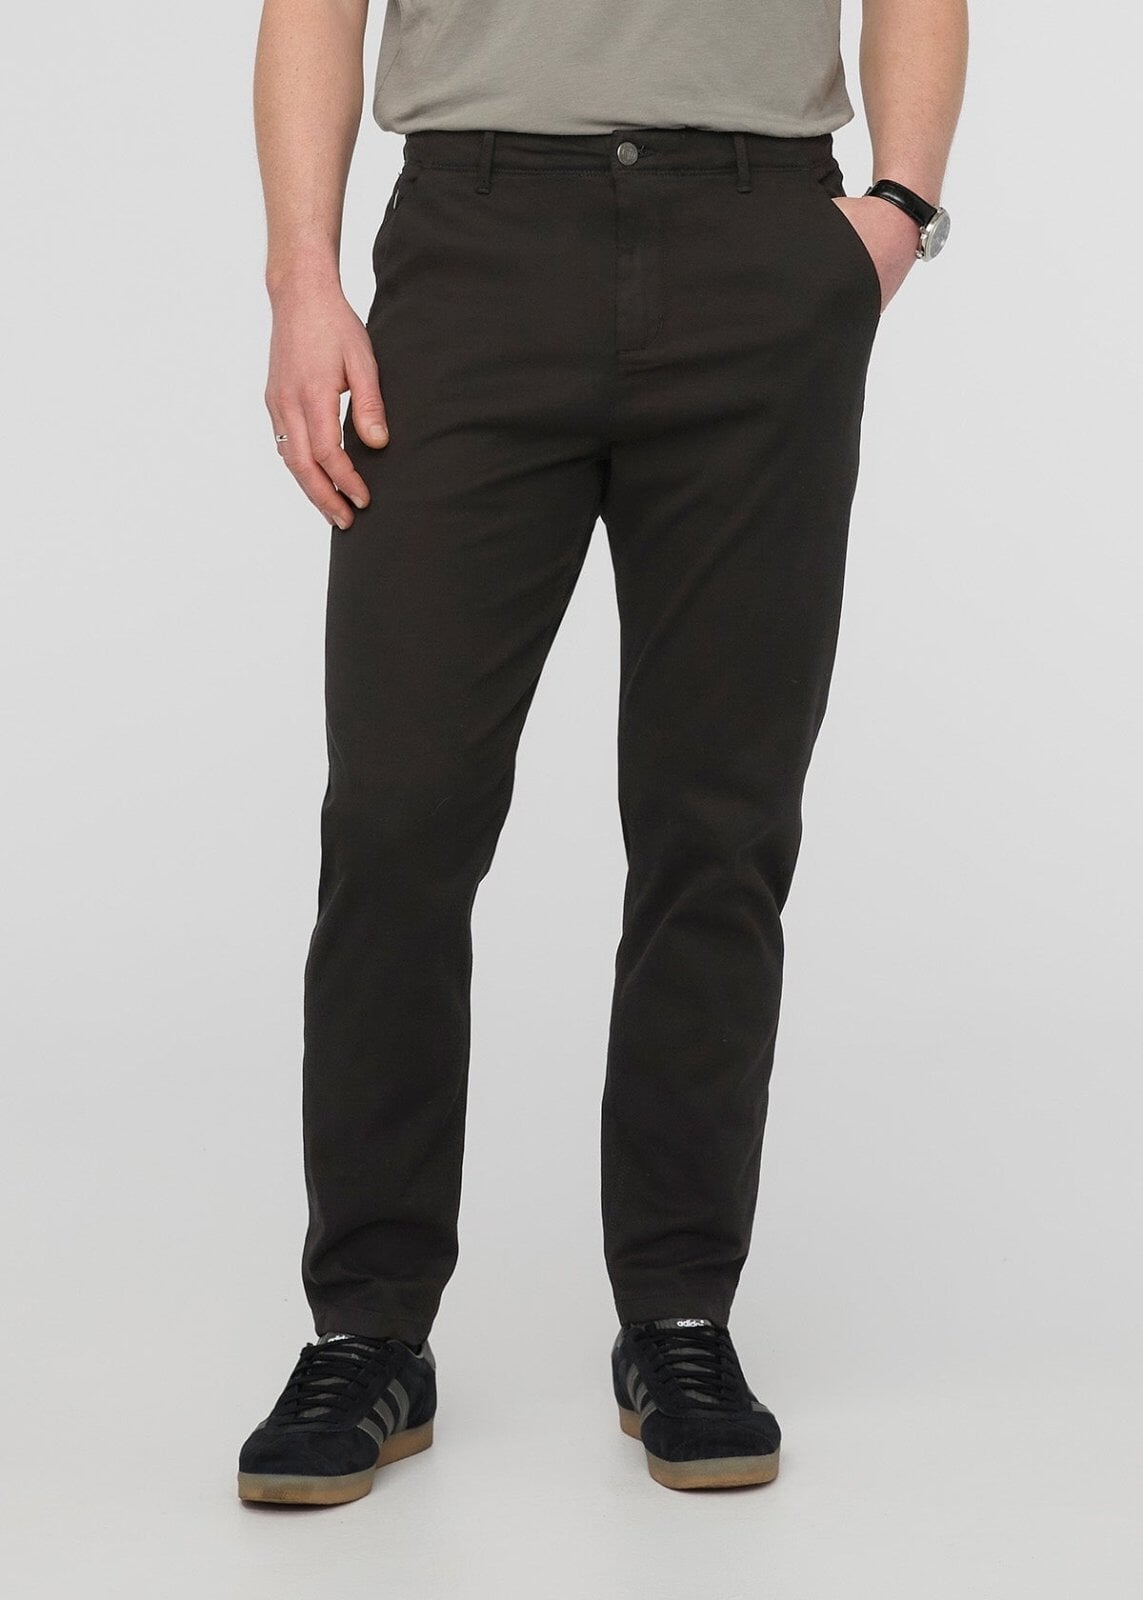 Buy Charcoal Grey Slim Stretch Chino Trousers from Next USA